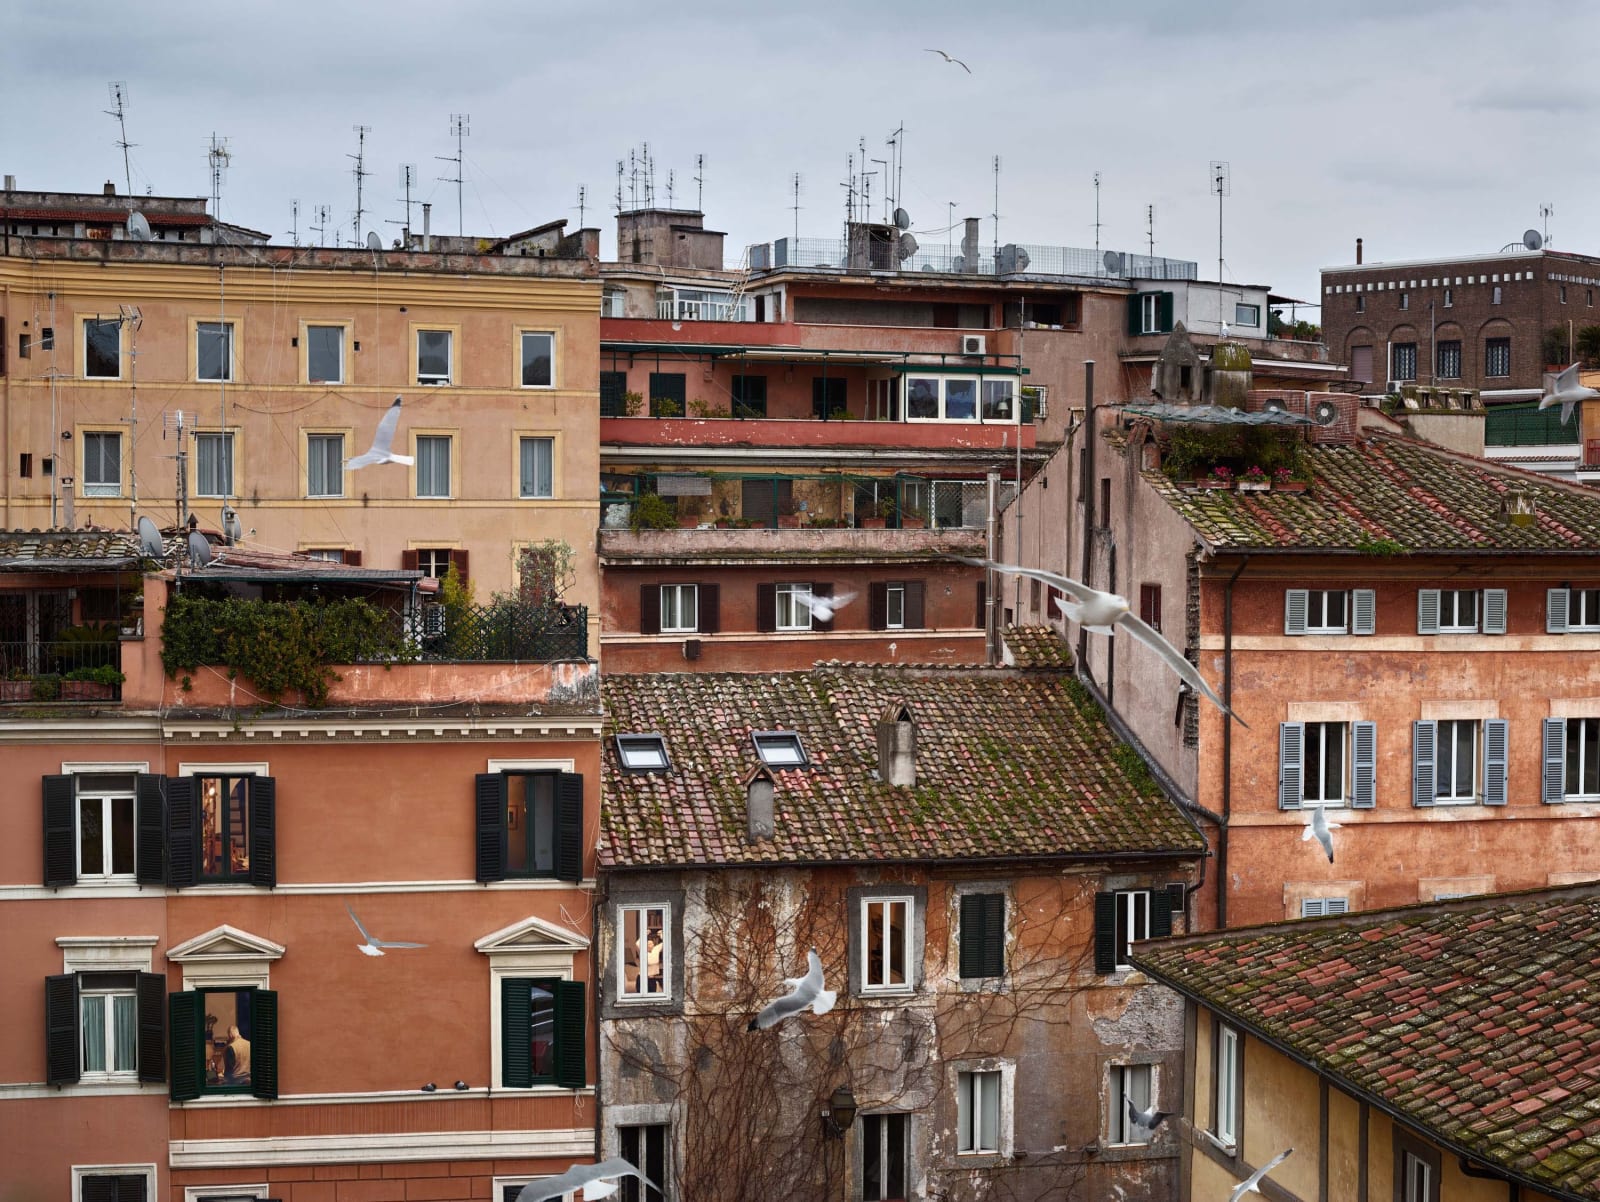 Gail Albert Halaban Out My Window Italy Out My Window, Birds, Piazza dei Ponziani, Rome, February, 2017 Italian View of building red rooftops